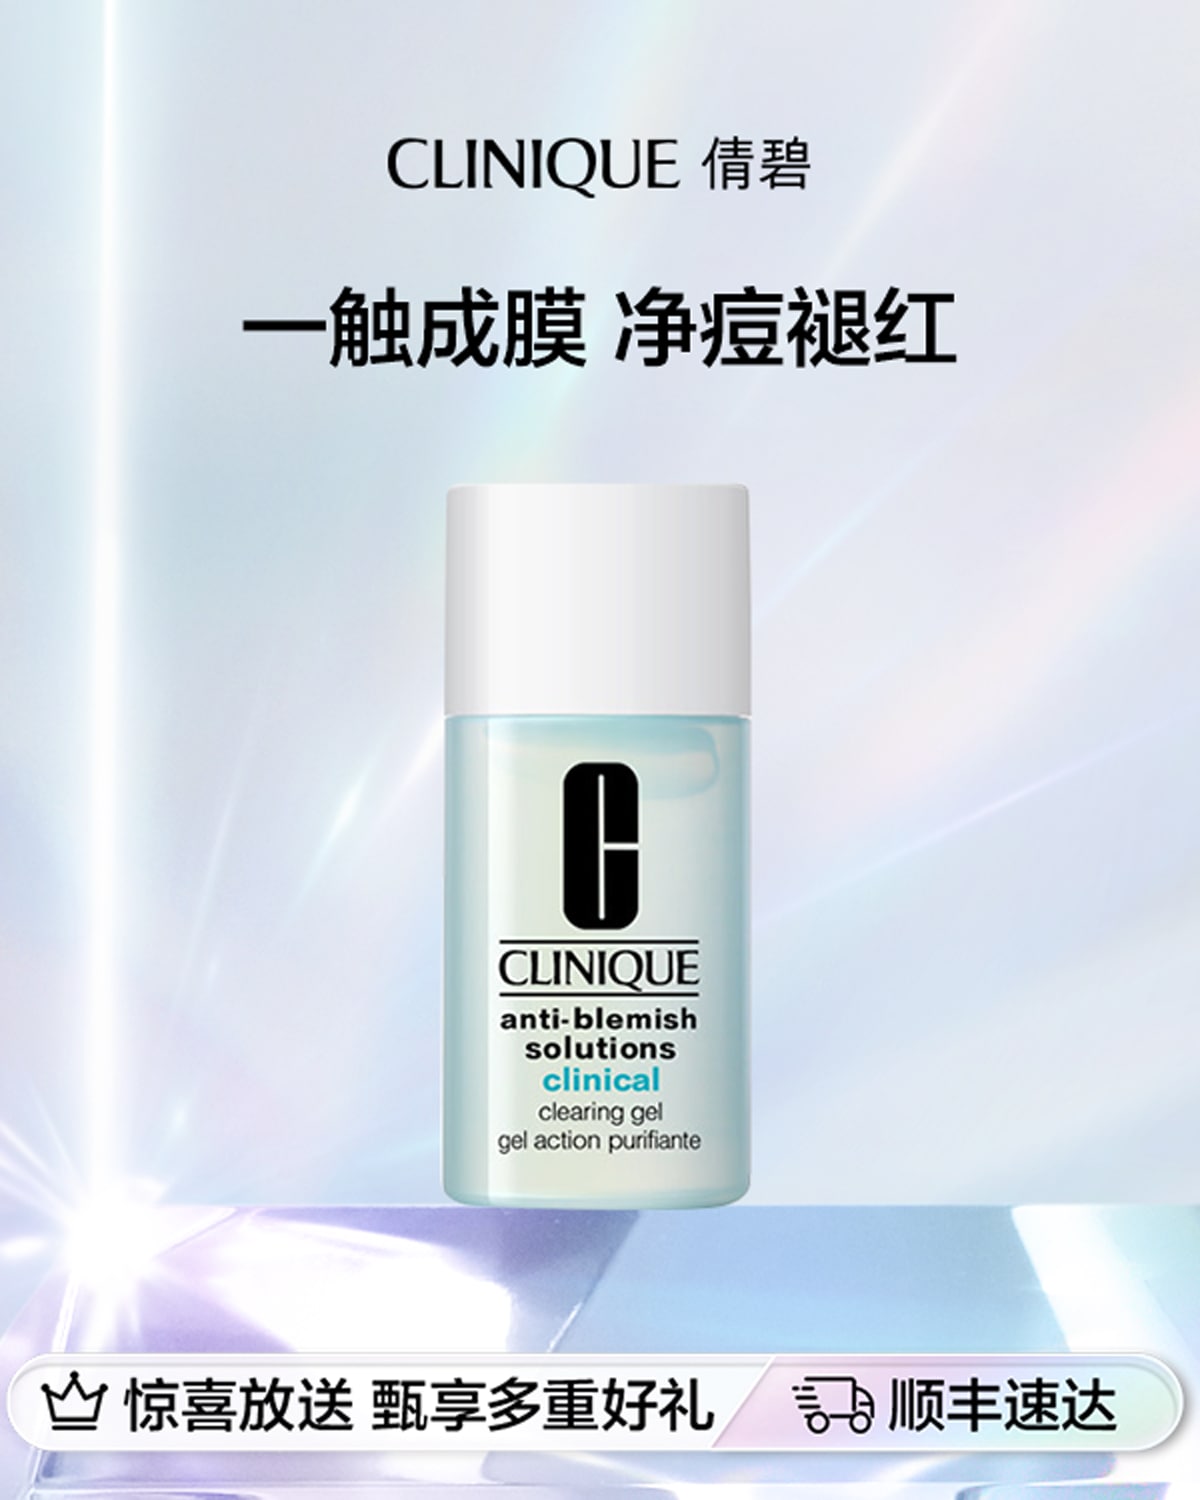 CLINIQUE ACNE SOLUTIONS CLINICAL CLEARING GEL